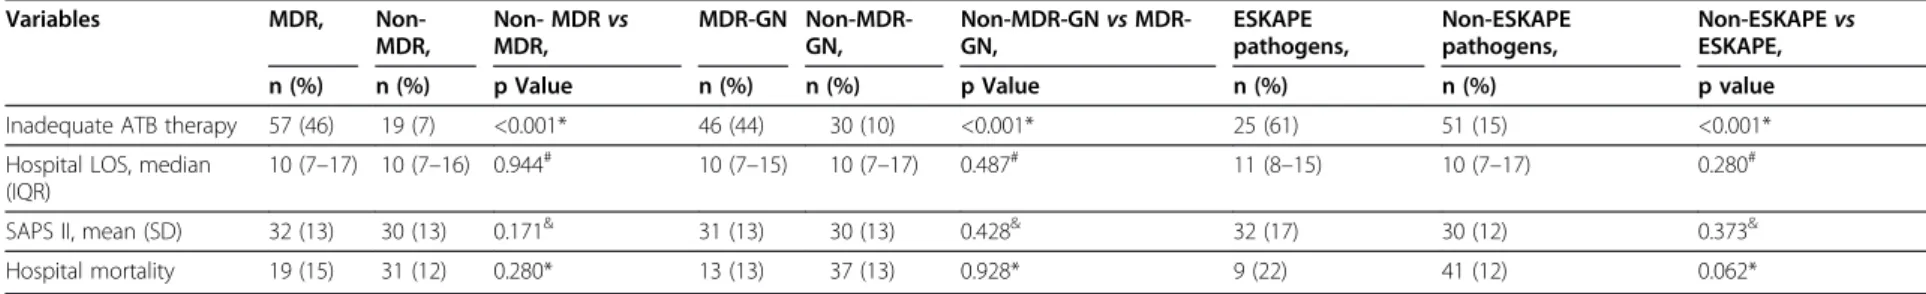 Table 4 Impact of infection by MDR pathogens, including MDR gram-negatives and pathogens from the ESKAPE group, in antibiotic therapy and hospital outcome Variables MDR,  Non-MDR, Non- MDR vsMDR, MDR-GN Non-MDR-GN, Non-MDR-GN vs MDR-GN, ESKAPE pathogens, N